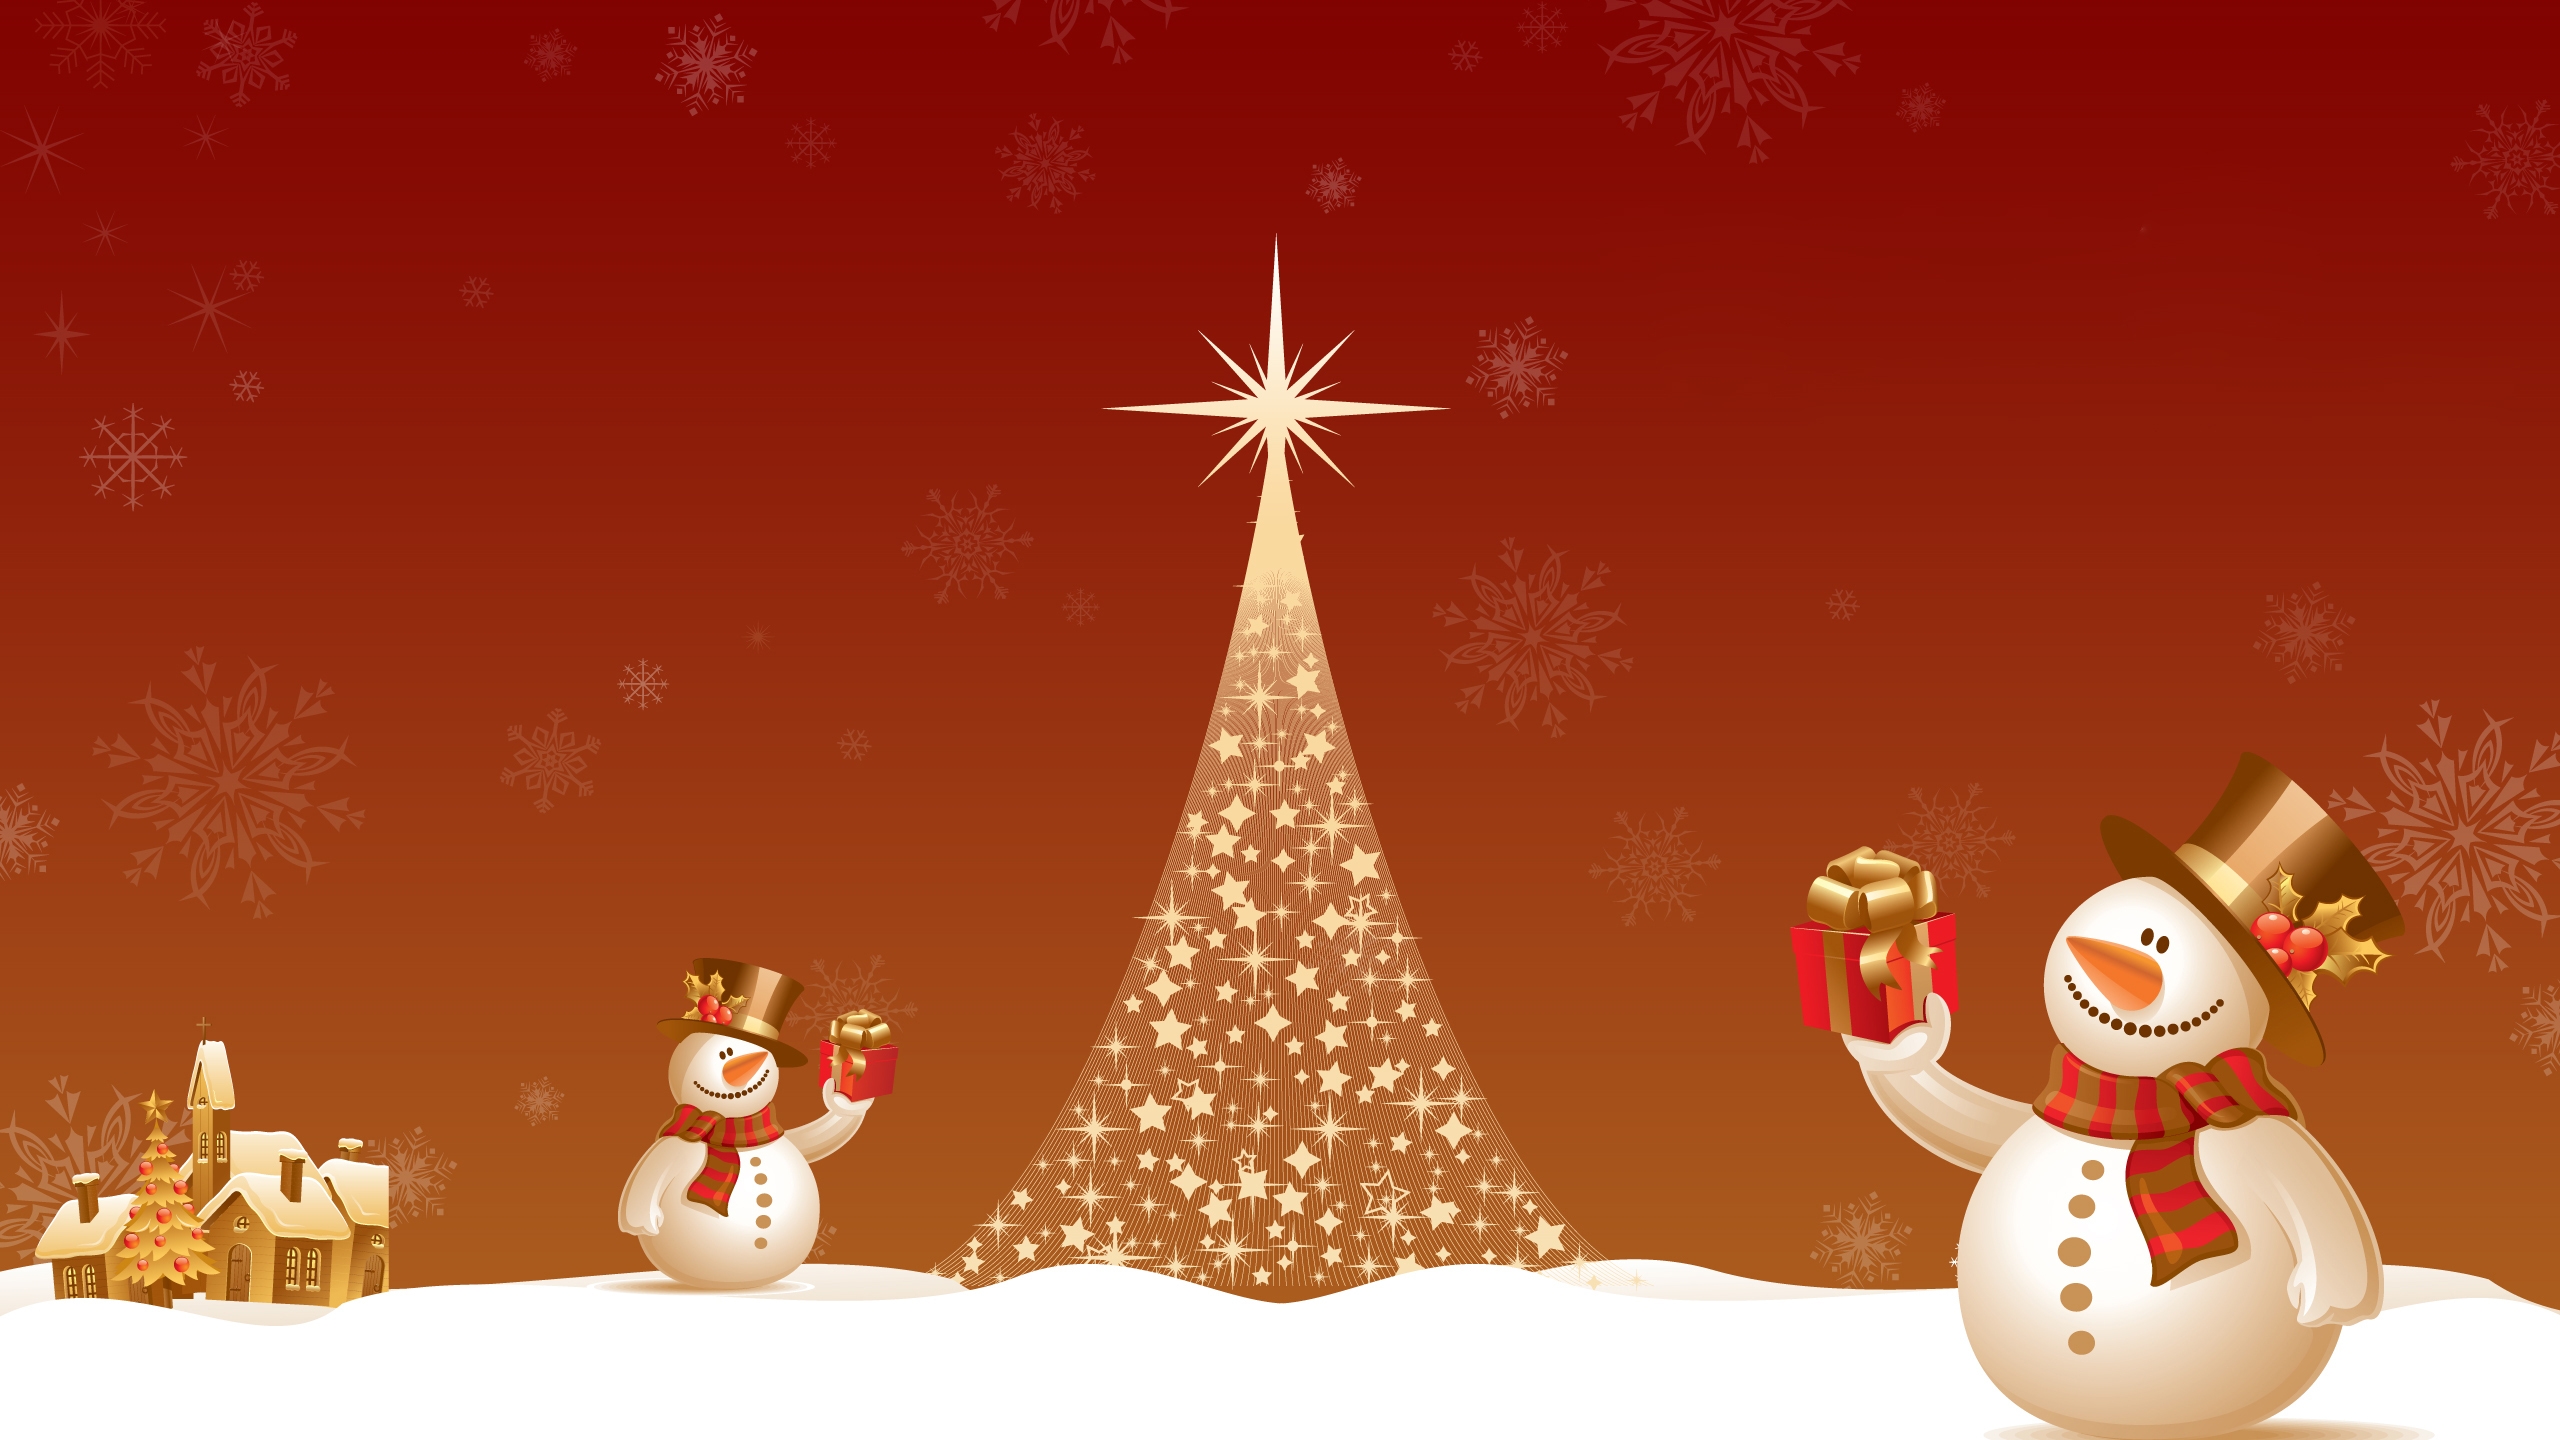 Snowman Close to Christmas Tree for 2560x1440 HDTV resolution